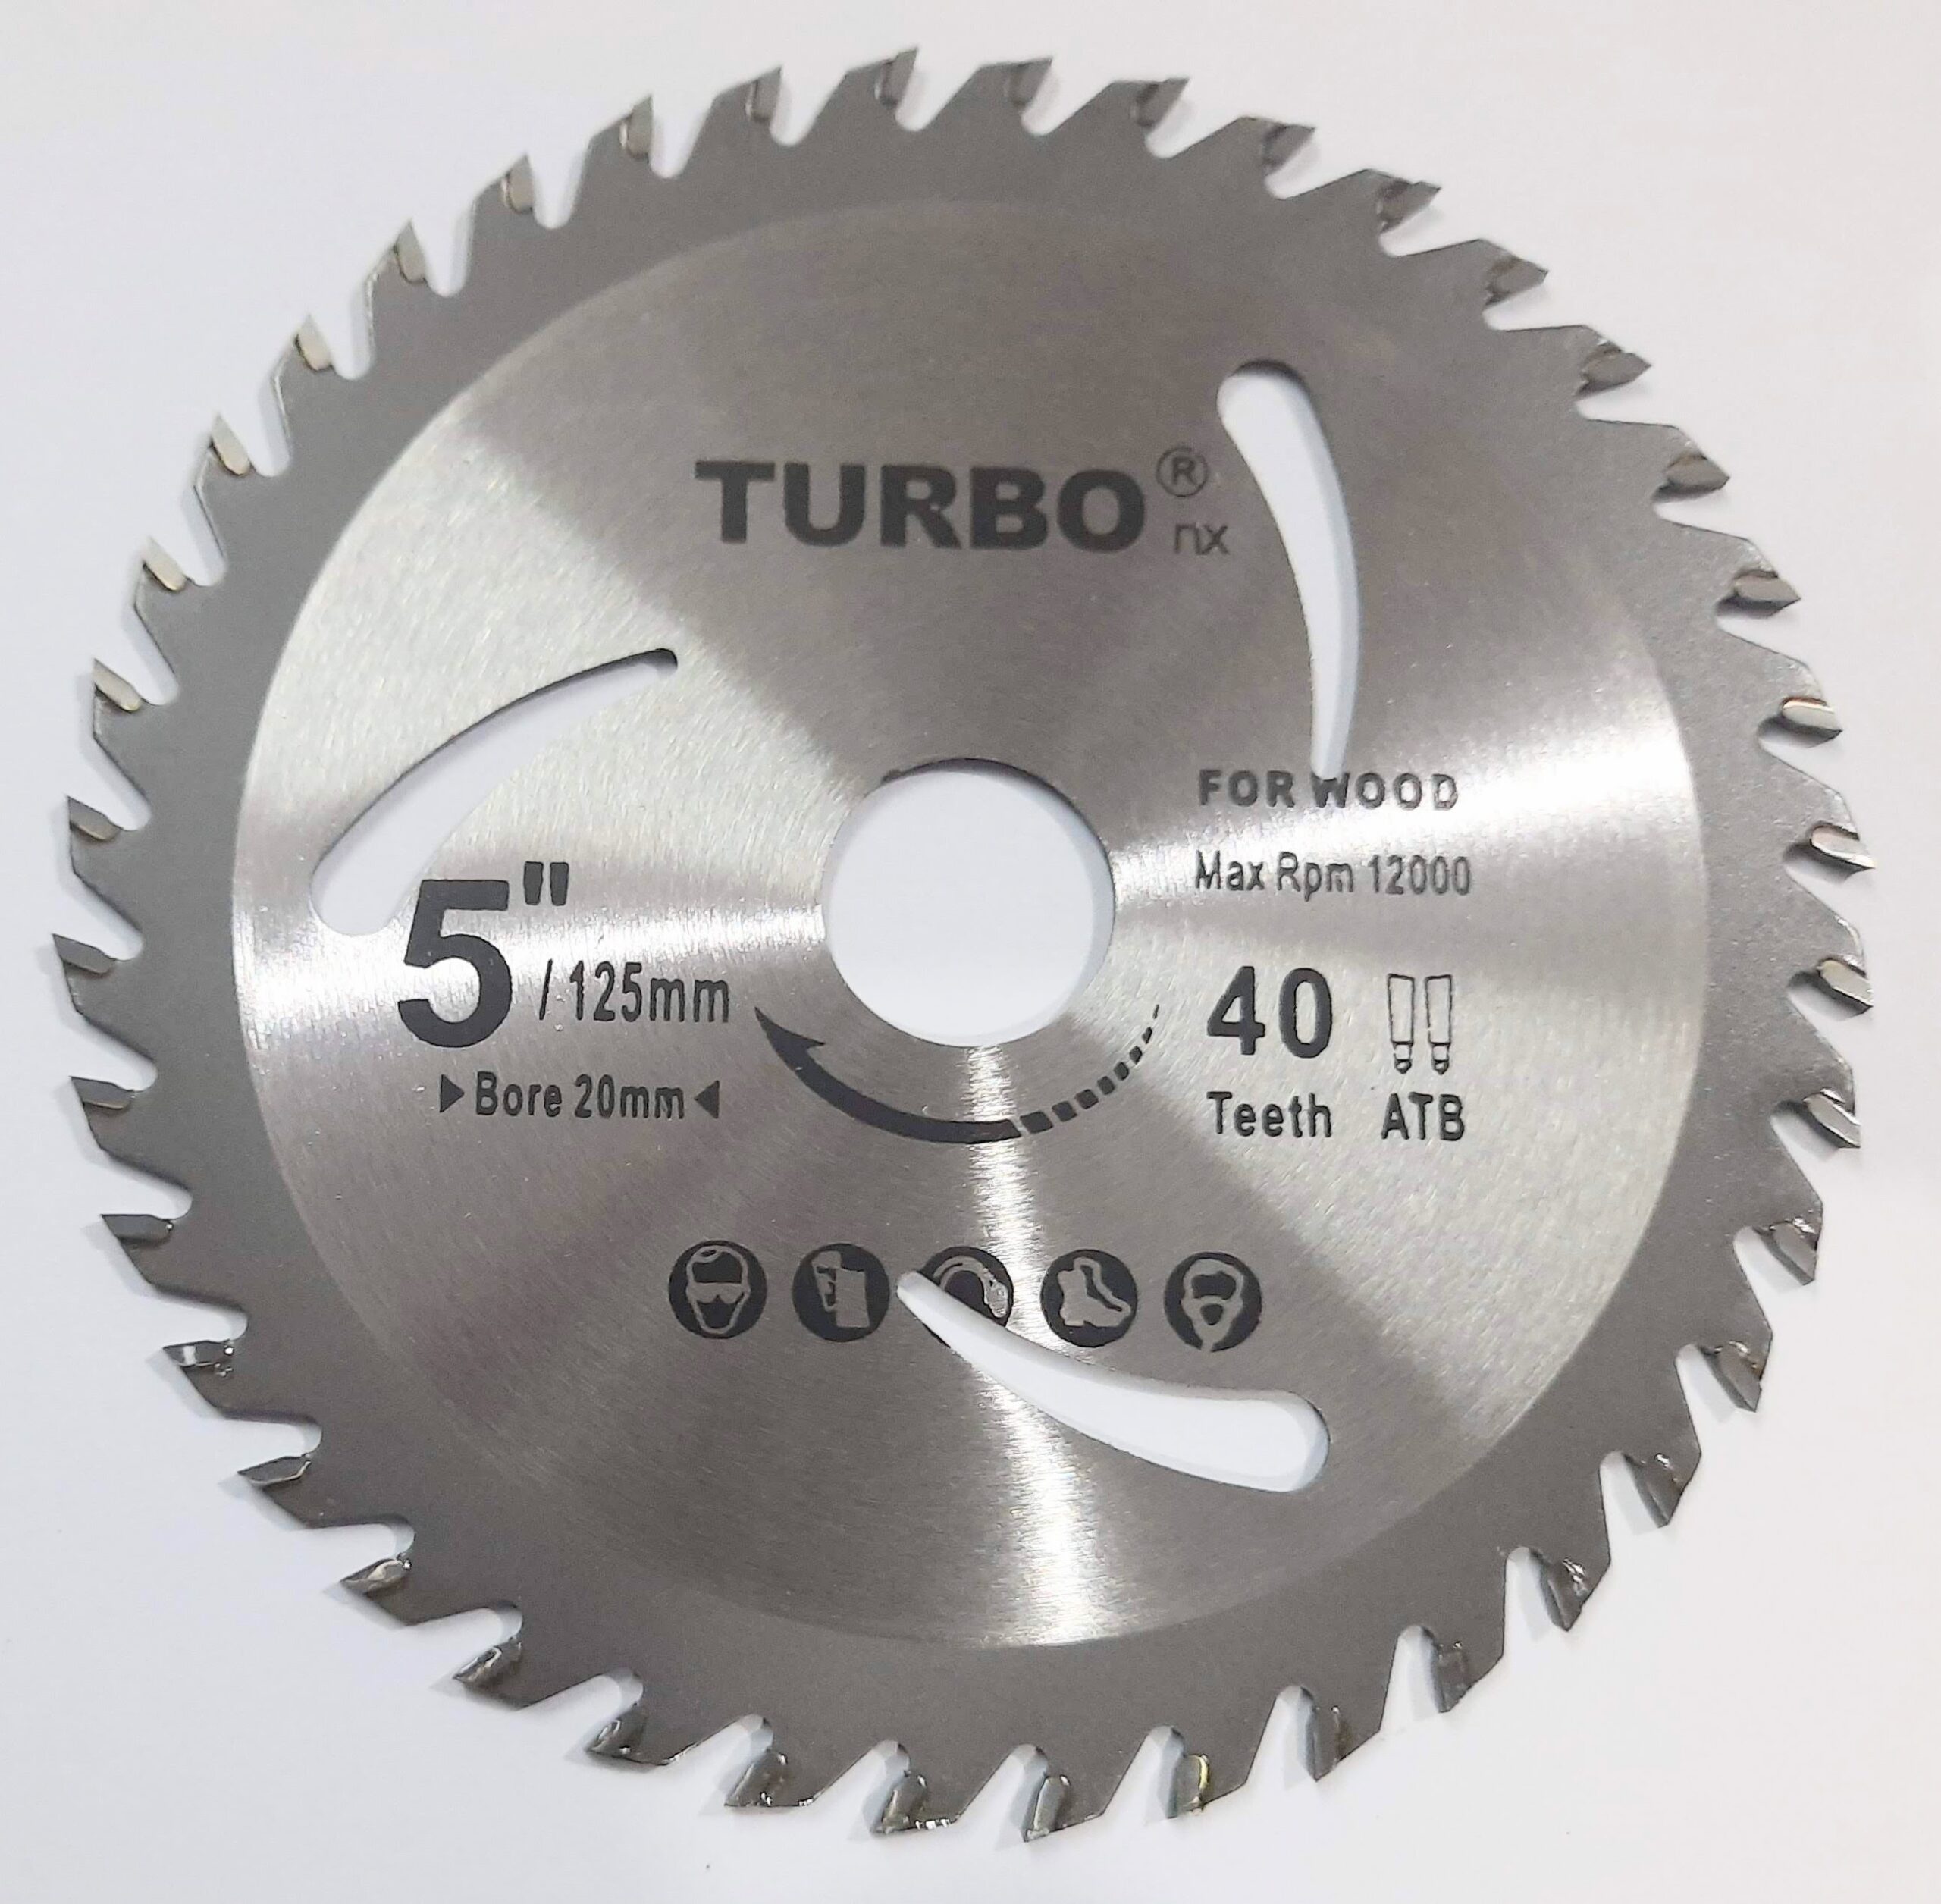 Turbo 125mm TCT Saw Blade (Pack Of 2)